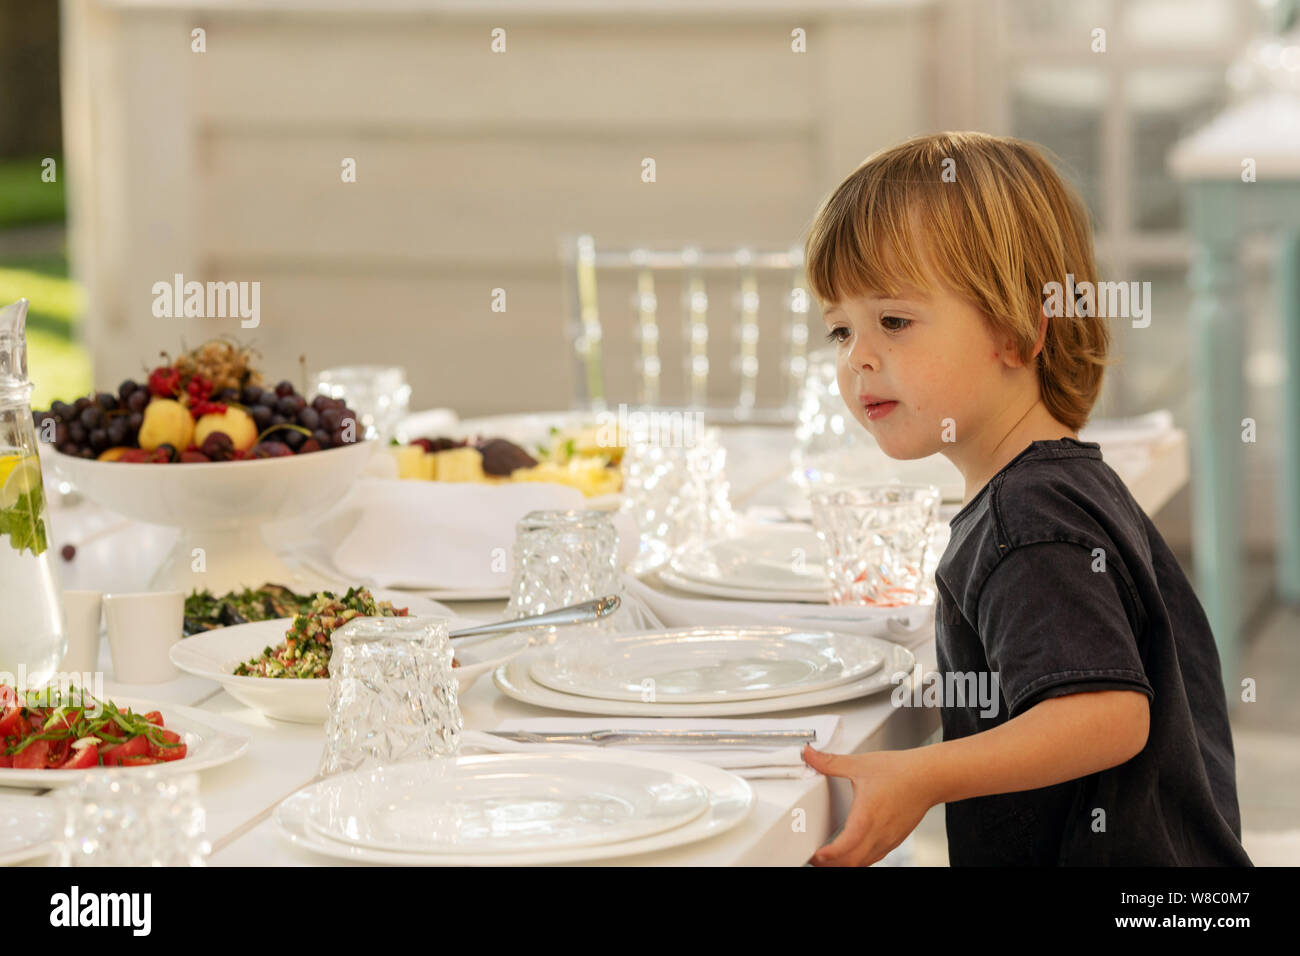 Cute toddler sitting at table served for celebration Stock Photo